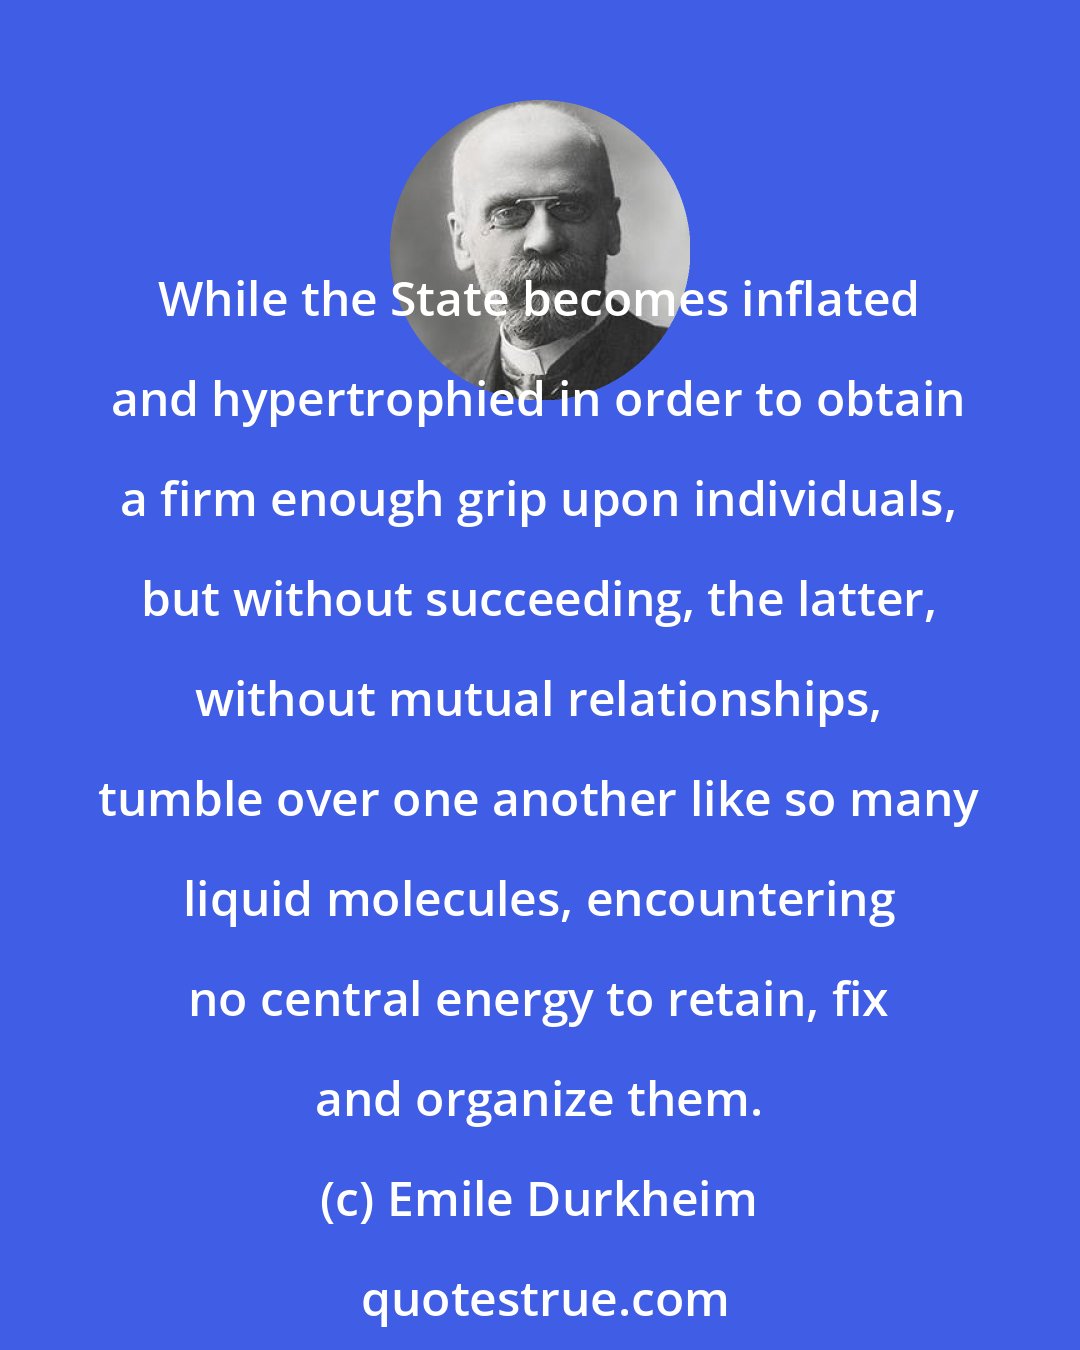 Emile Durkheim: While the State becomes inflated and hypertrophied in order to obtain a firm enough grip upon individuals, but without succeeding, the latter, without mutual relationships, tumble over one another like so many liquid molecules, encountering no central energy to retain, fix and organize them.